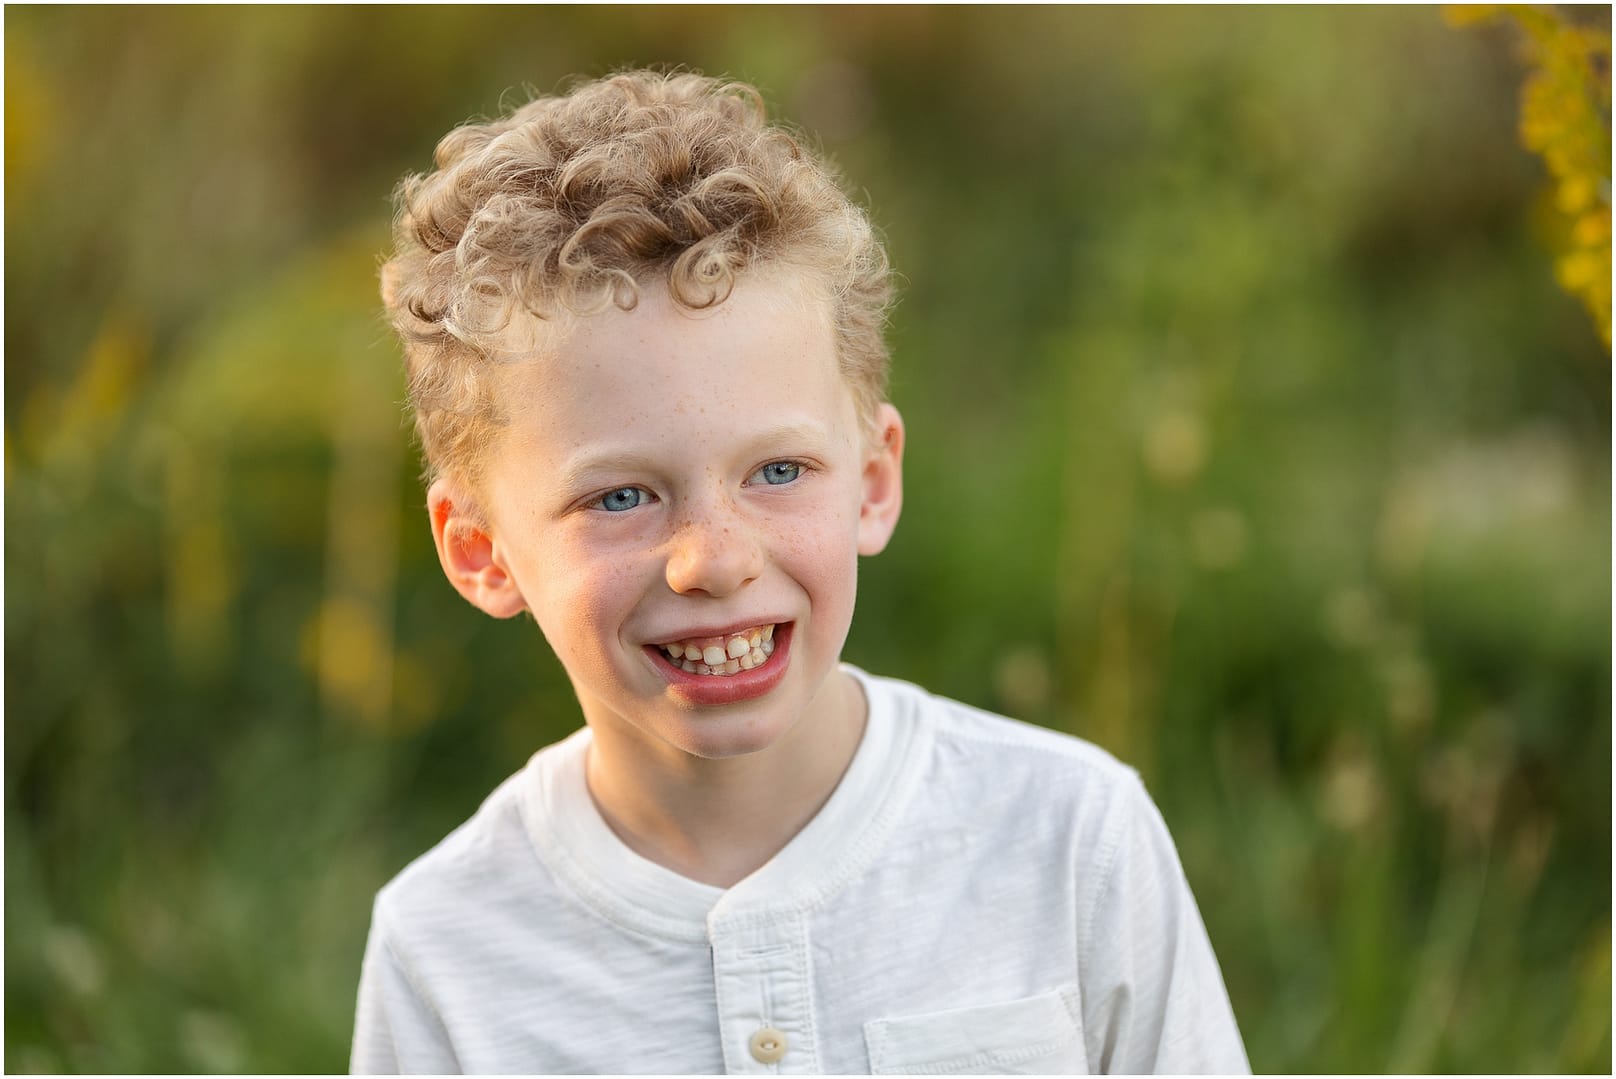 Candid of curly haired little boy. Photo by Tiffany Hix Photography.